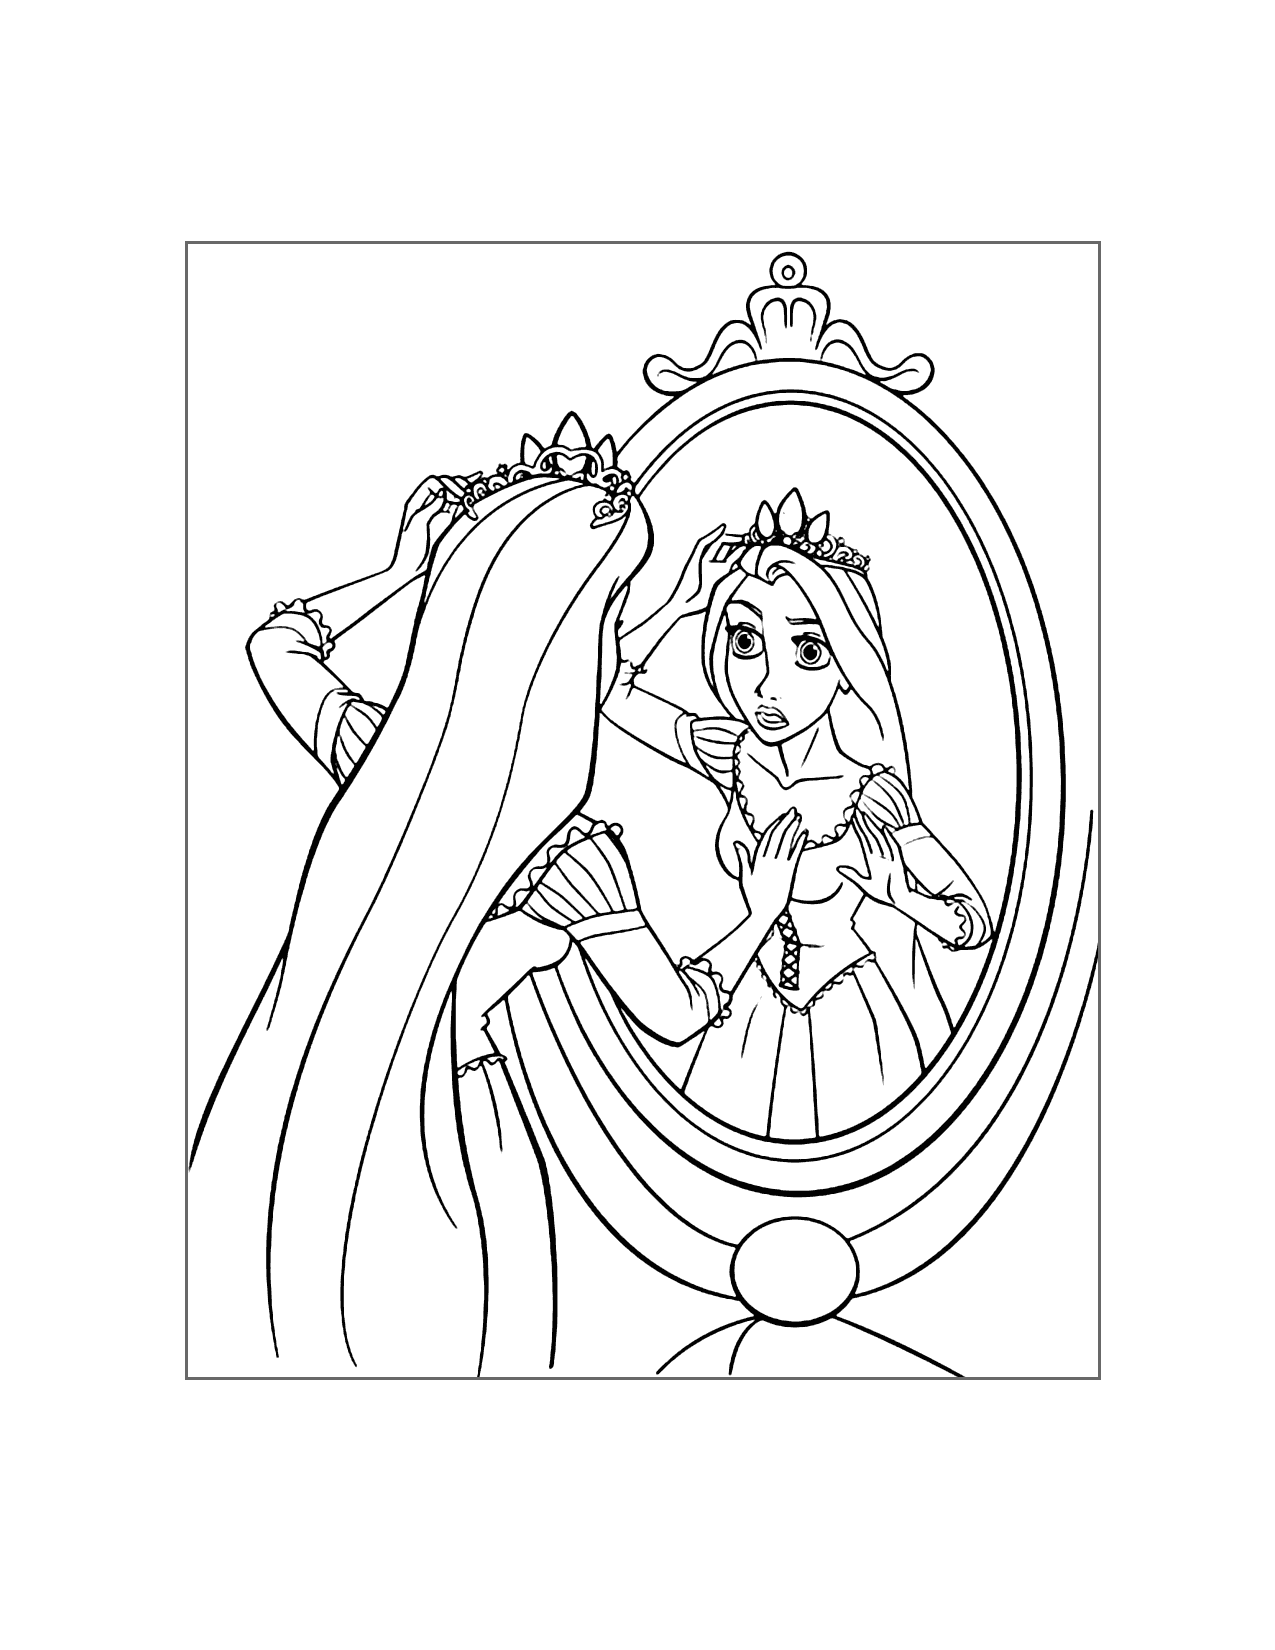 Rapunzel Finds Her Crown Coloring Page